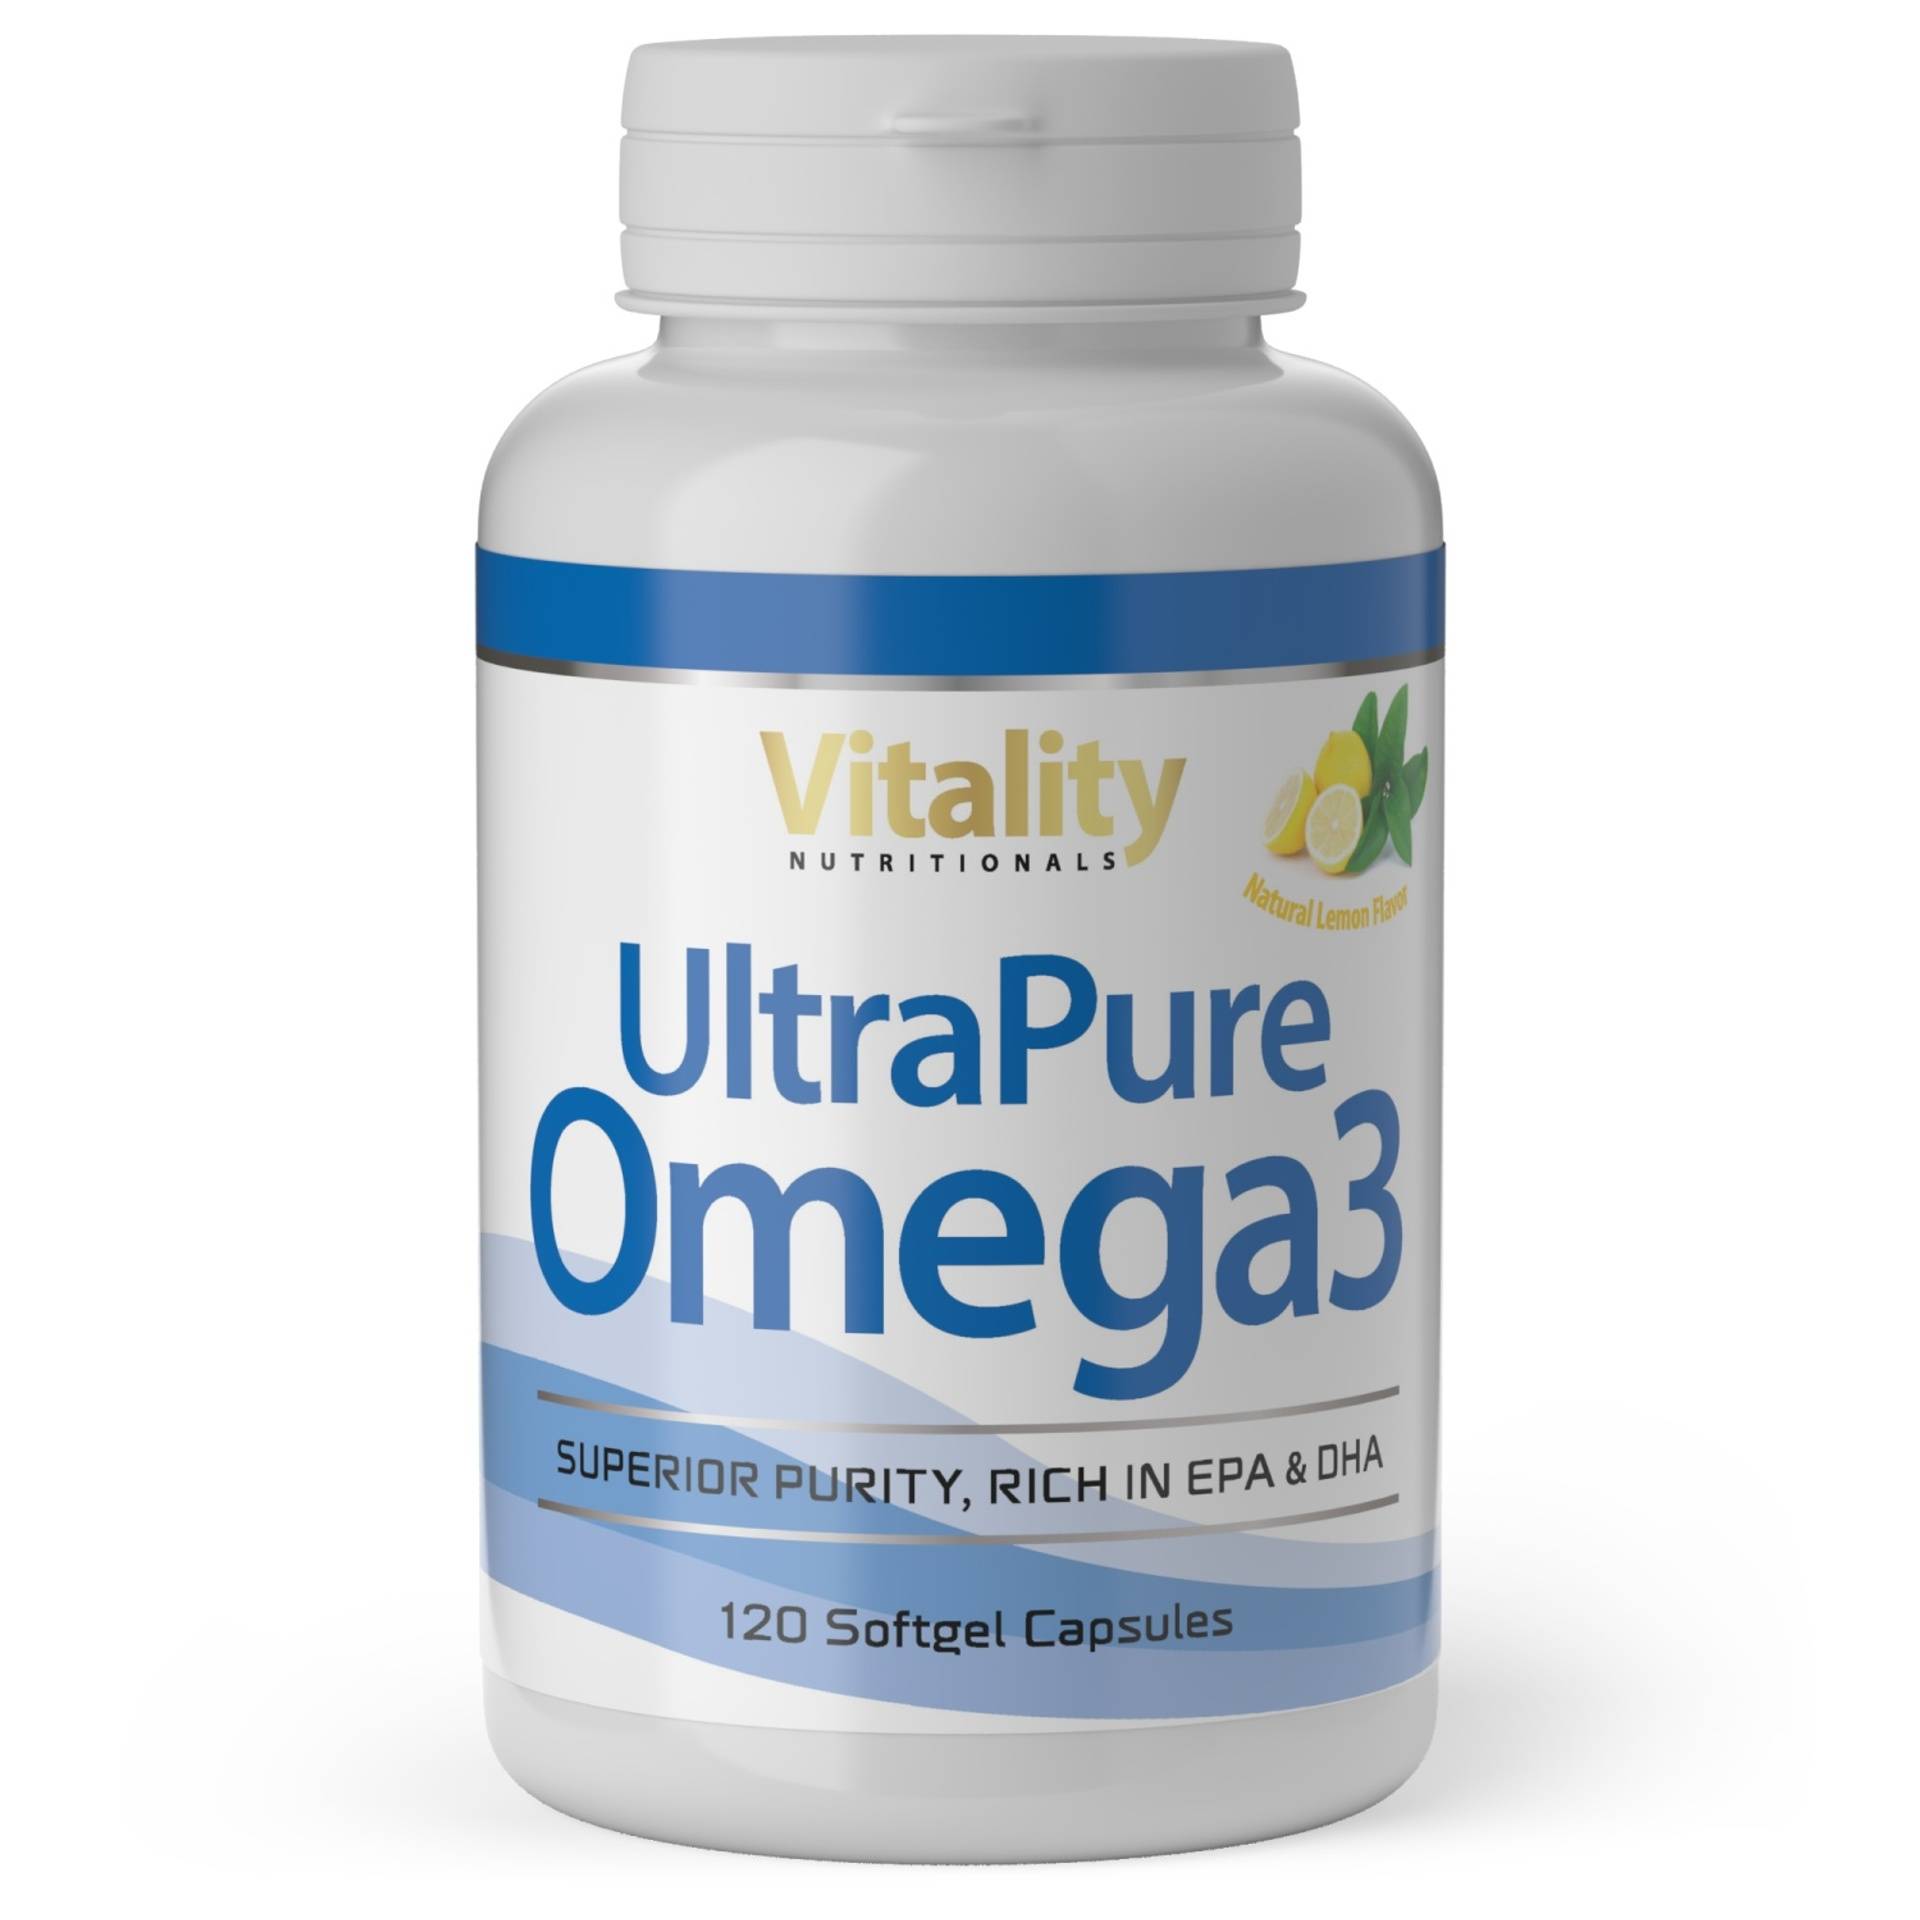 6852-04 - Ultrapure Omega 3_main_excl_format.png